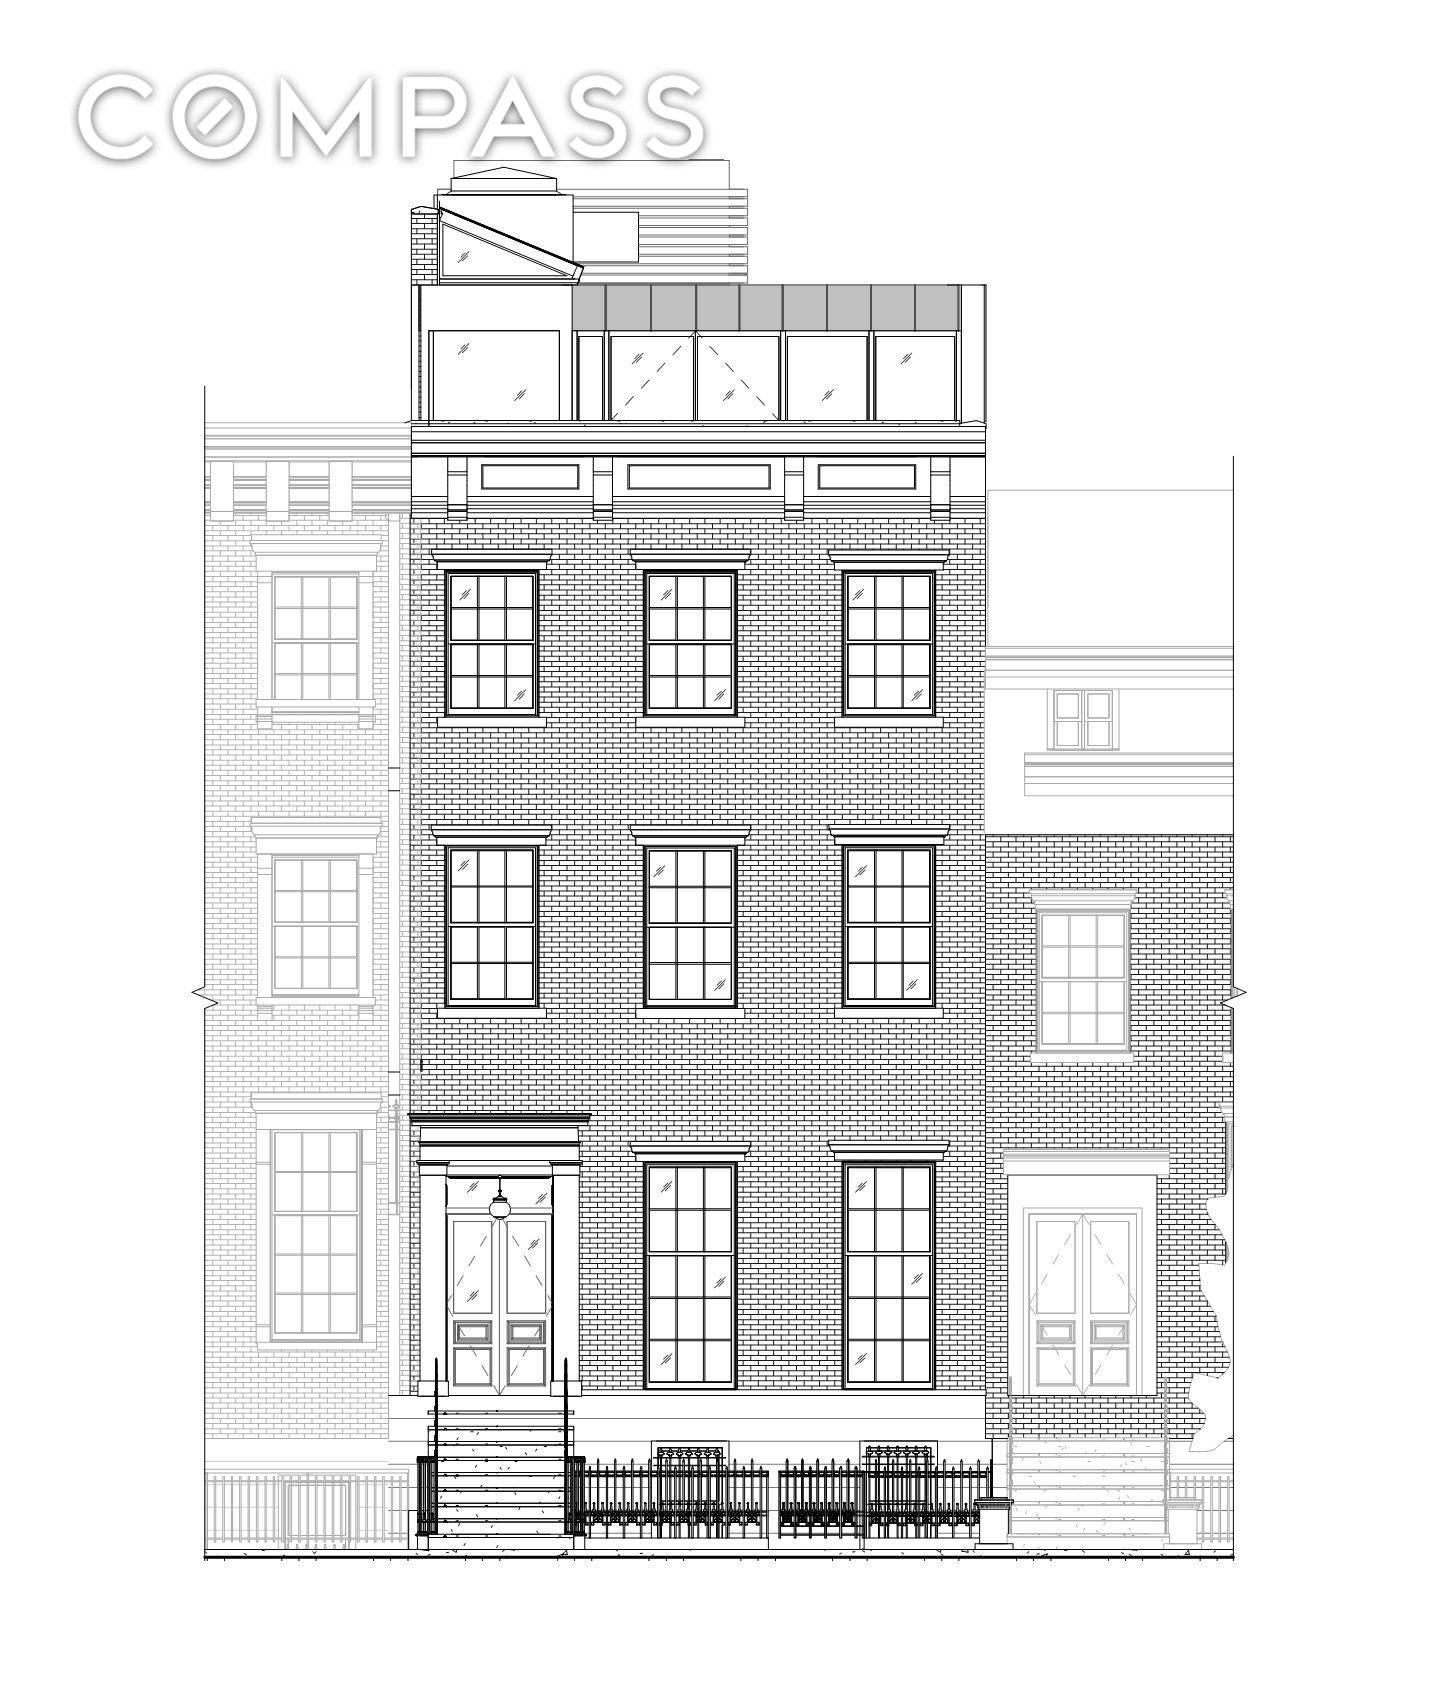 TOWNHOUSE IN THE ROUGH THE OPPORTUNITY Build your very own dream townhouse situated on arguably the nicest block in Chelsea.